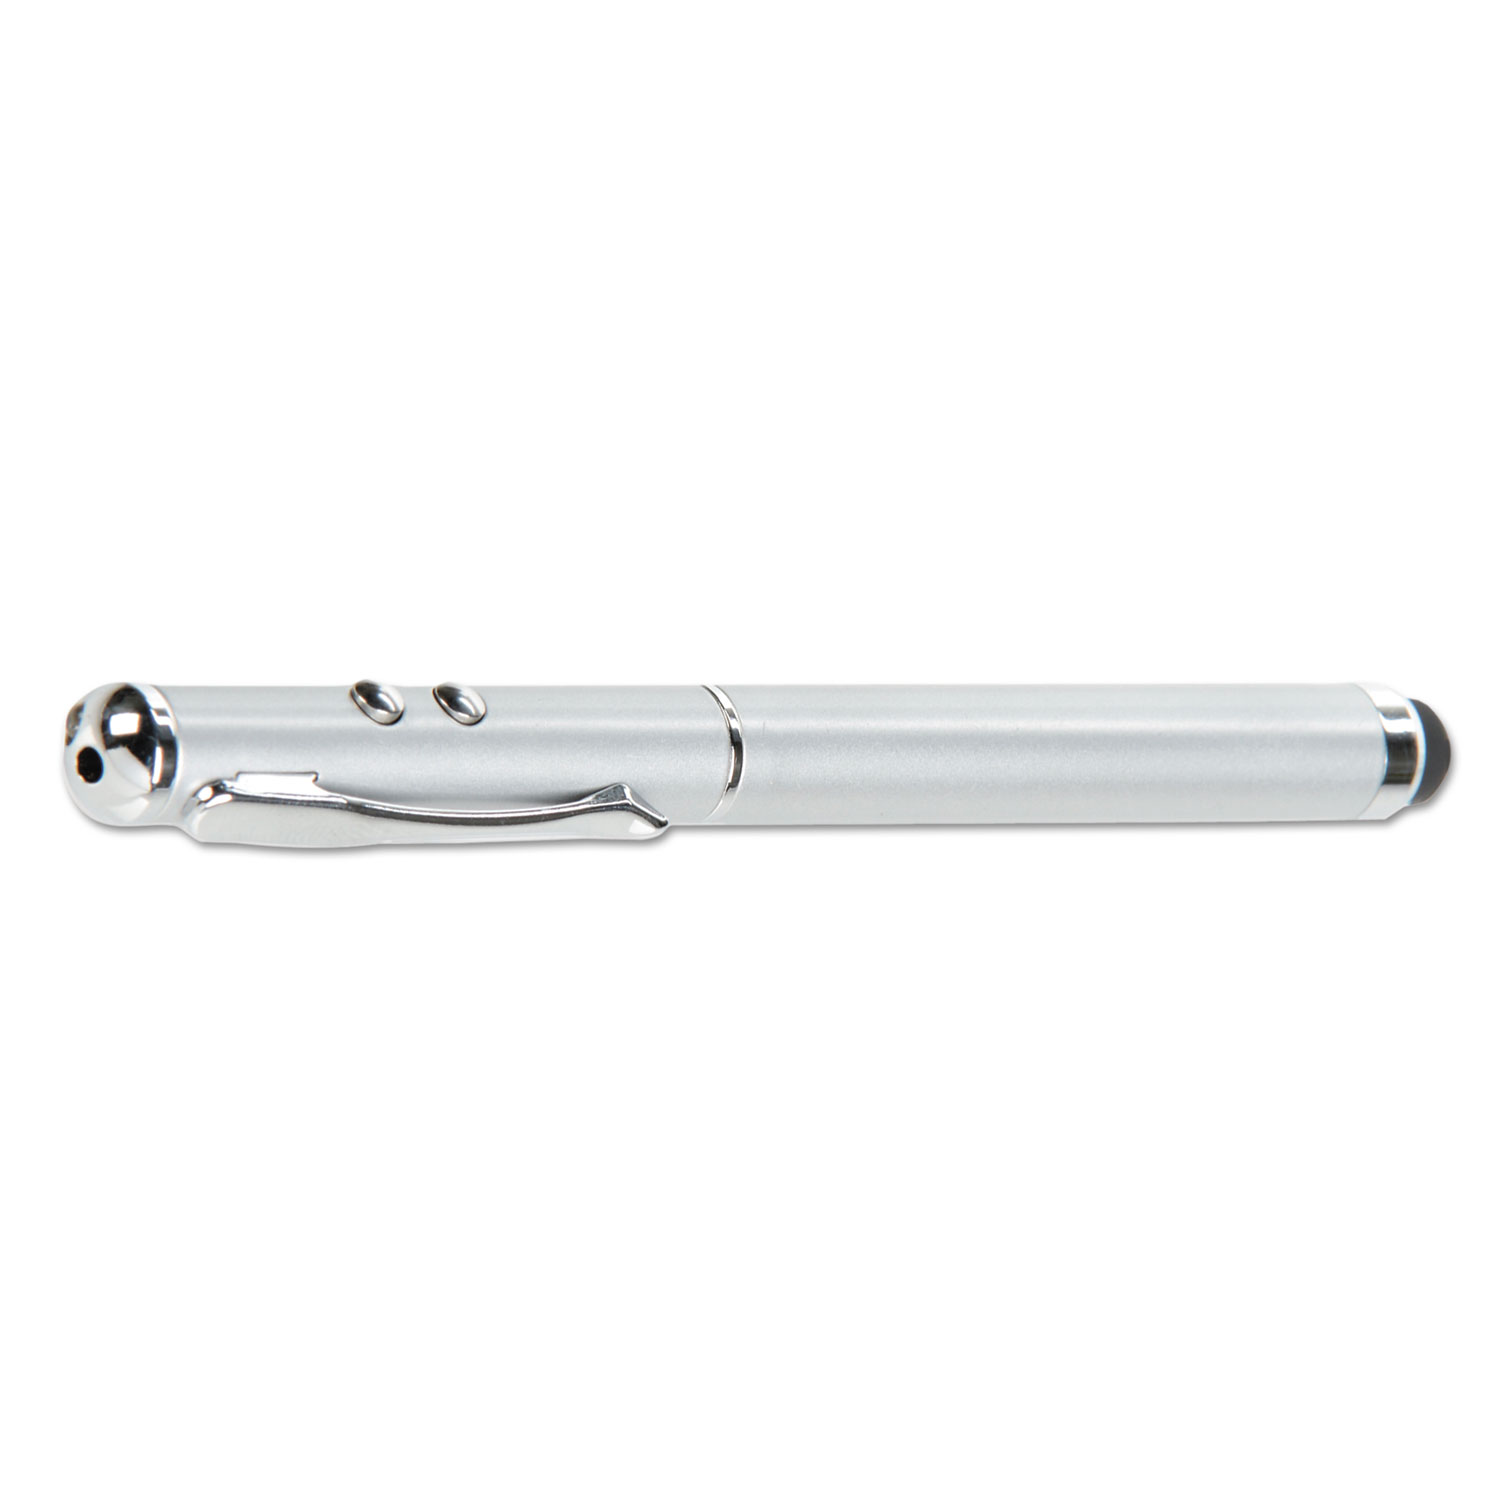 3-in-1 Laser Pointer with Stylus and LED Light, Class 2, Projects 984 ft, Silver